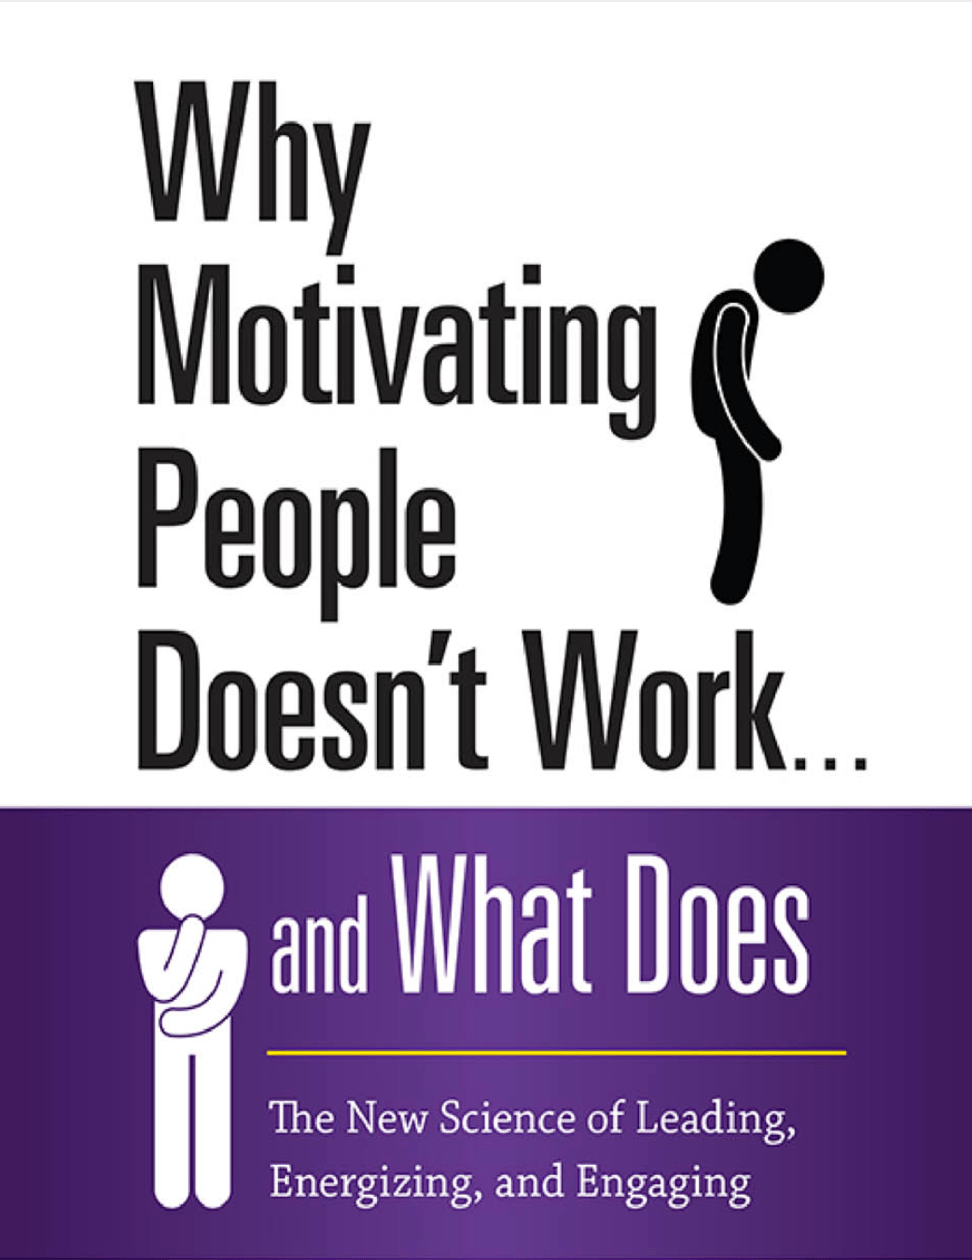 Why Motivating People Doesn’t Work…And What Does read online at BusinessBooks.cc